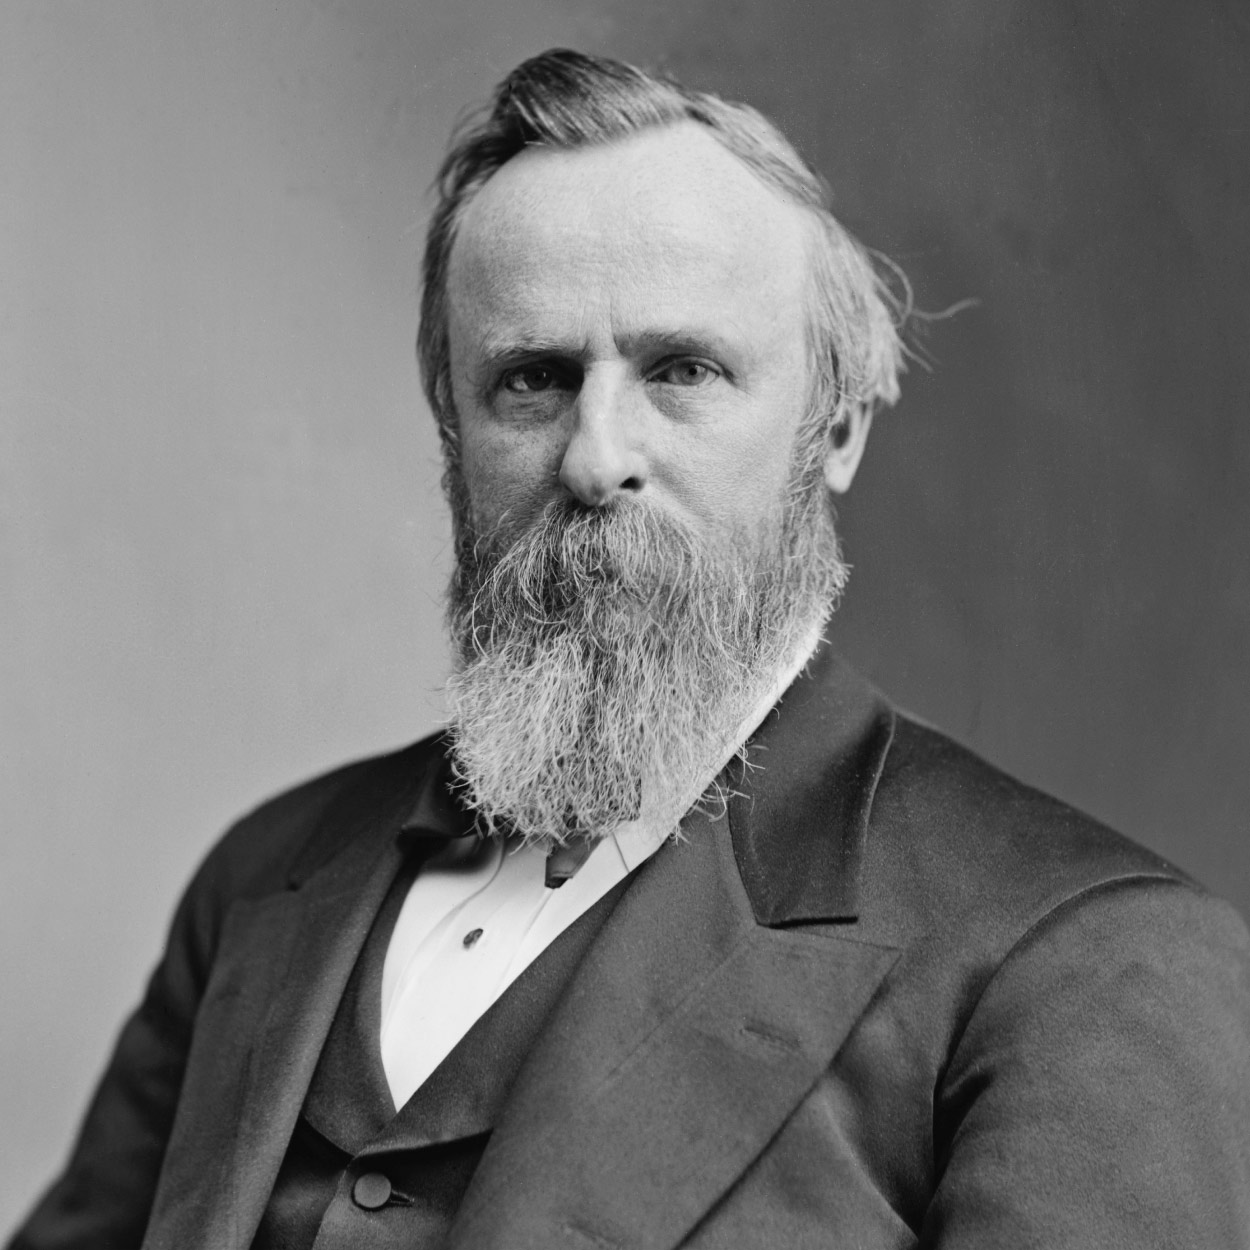 Portrait of Rutherford B. Hayes, the 19th President of the United States